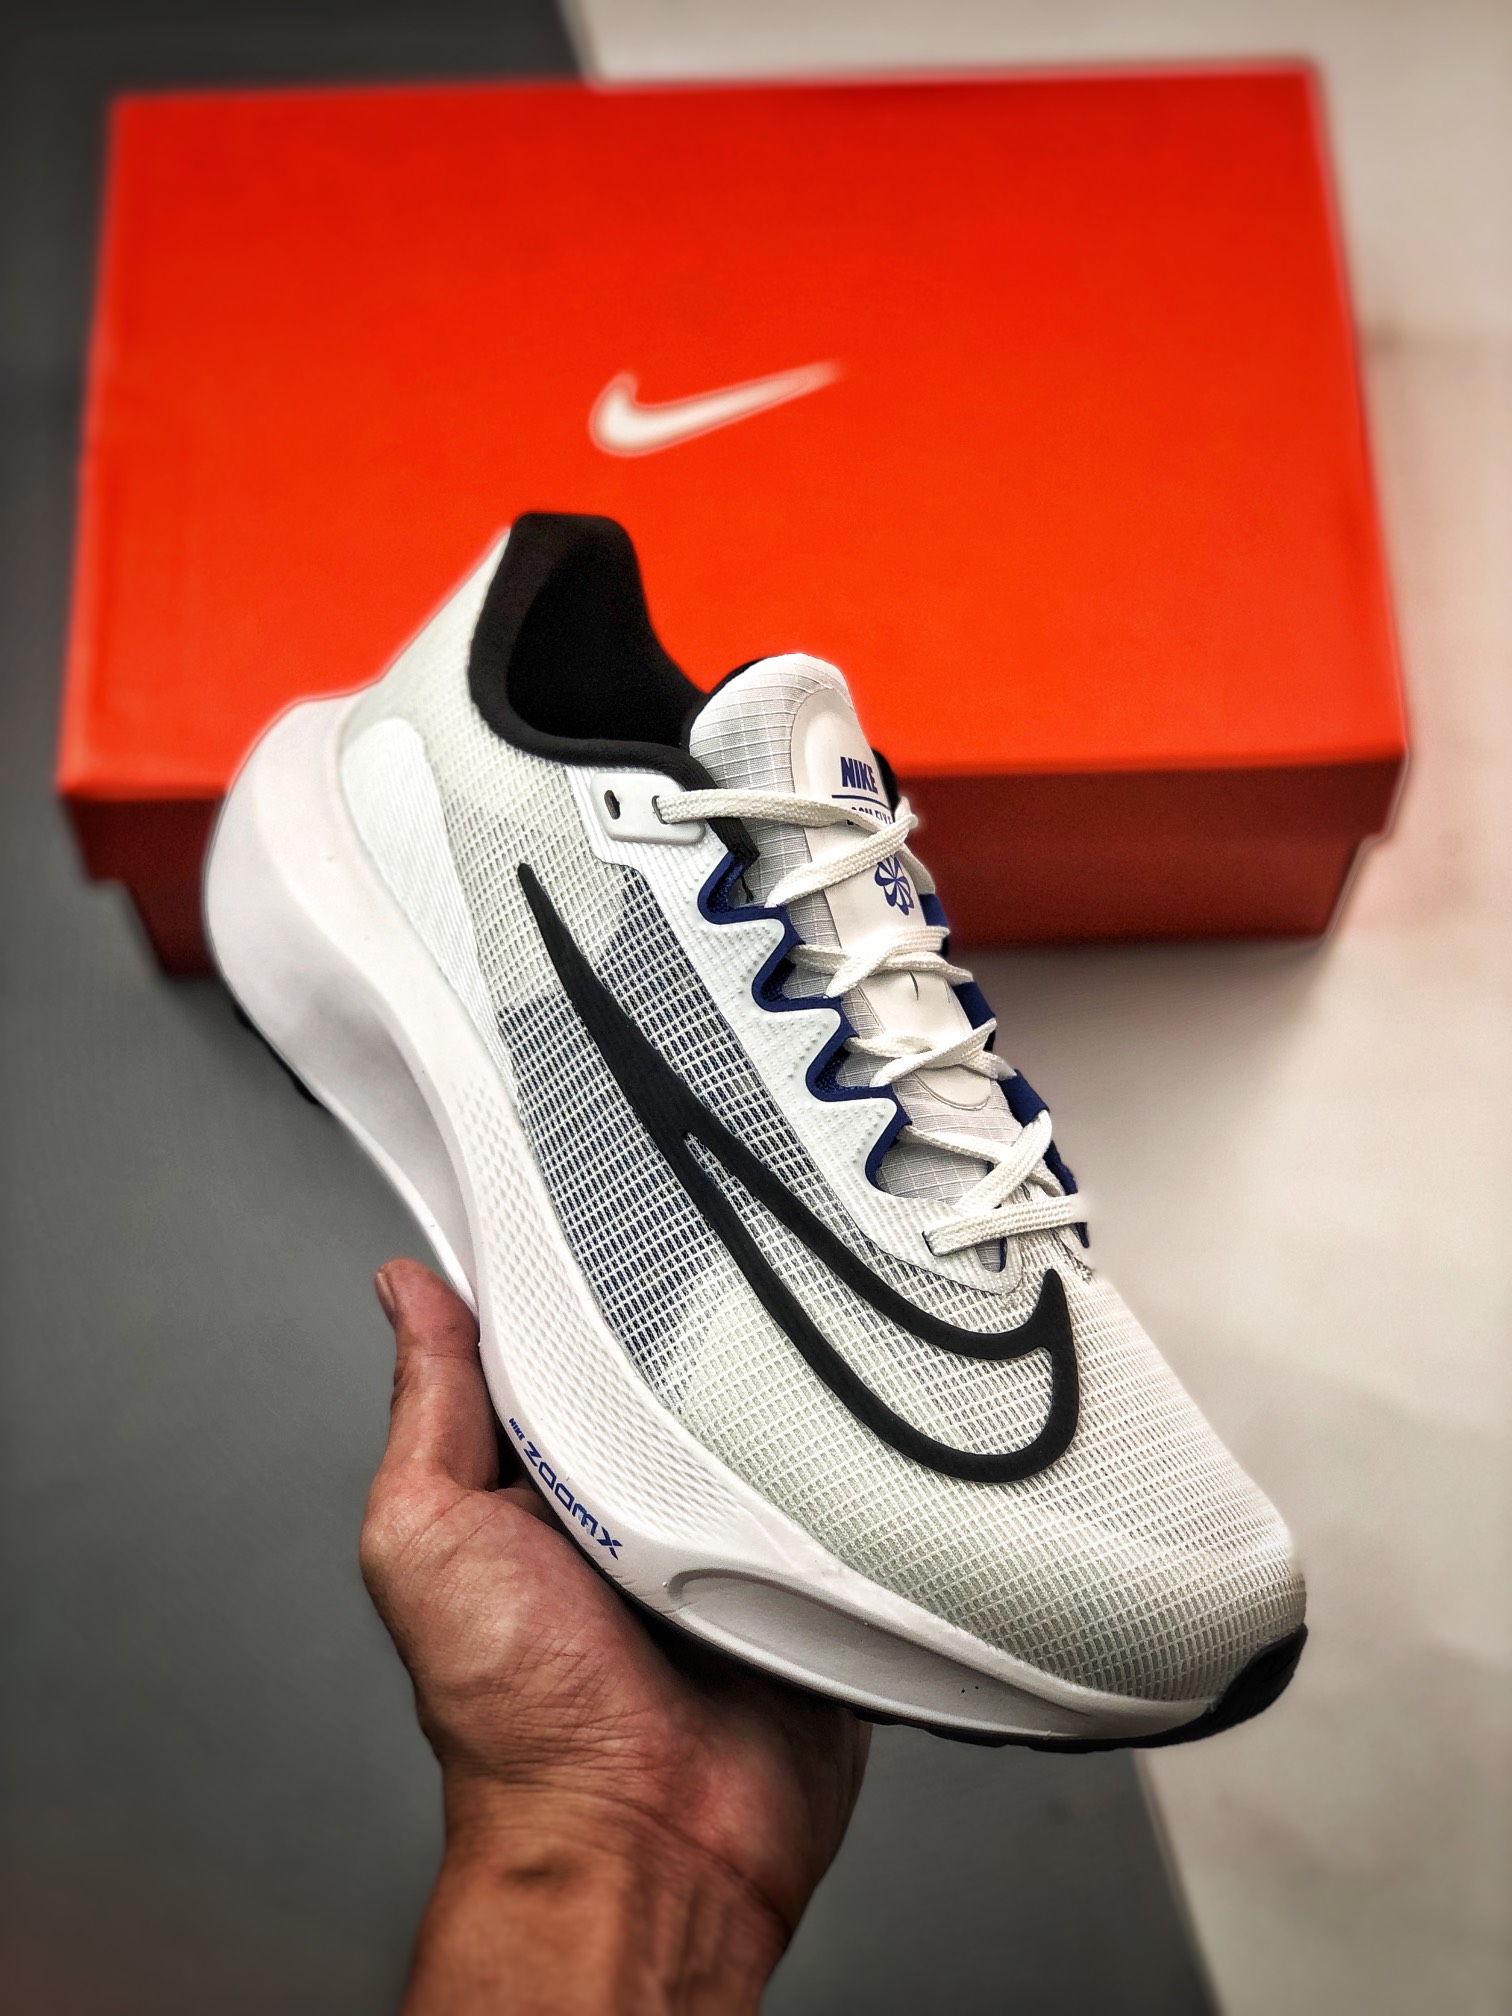 Nike Zoom Fly 5 White Black Shoes